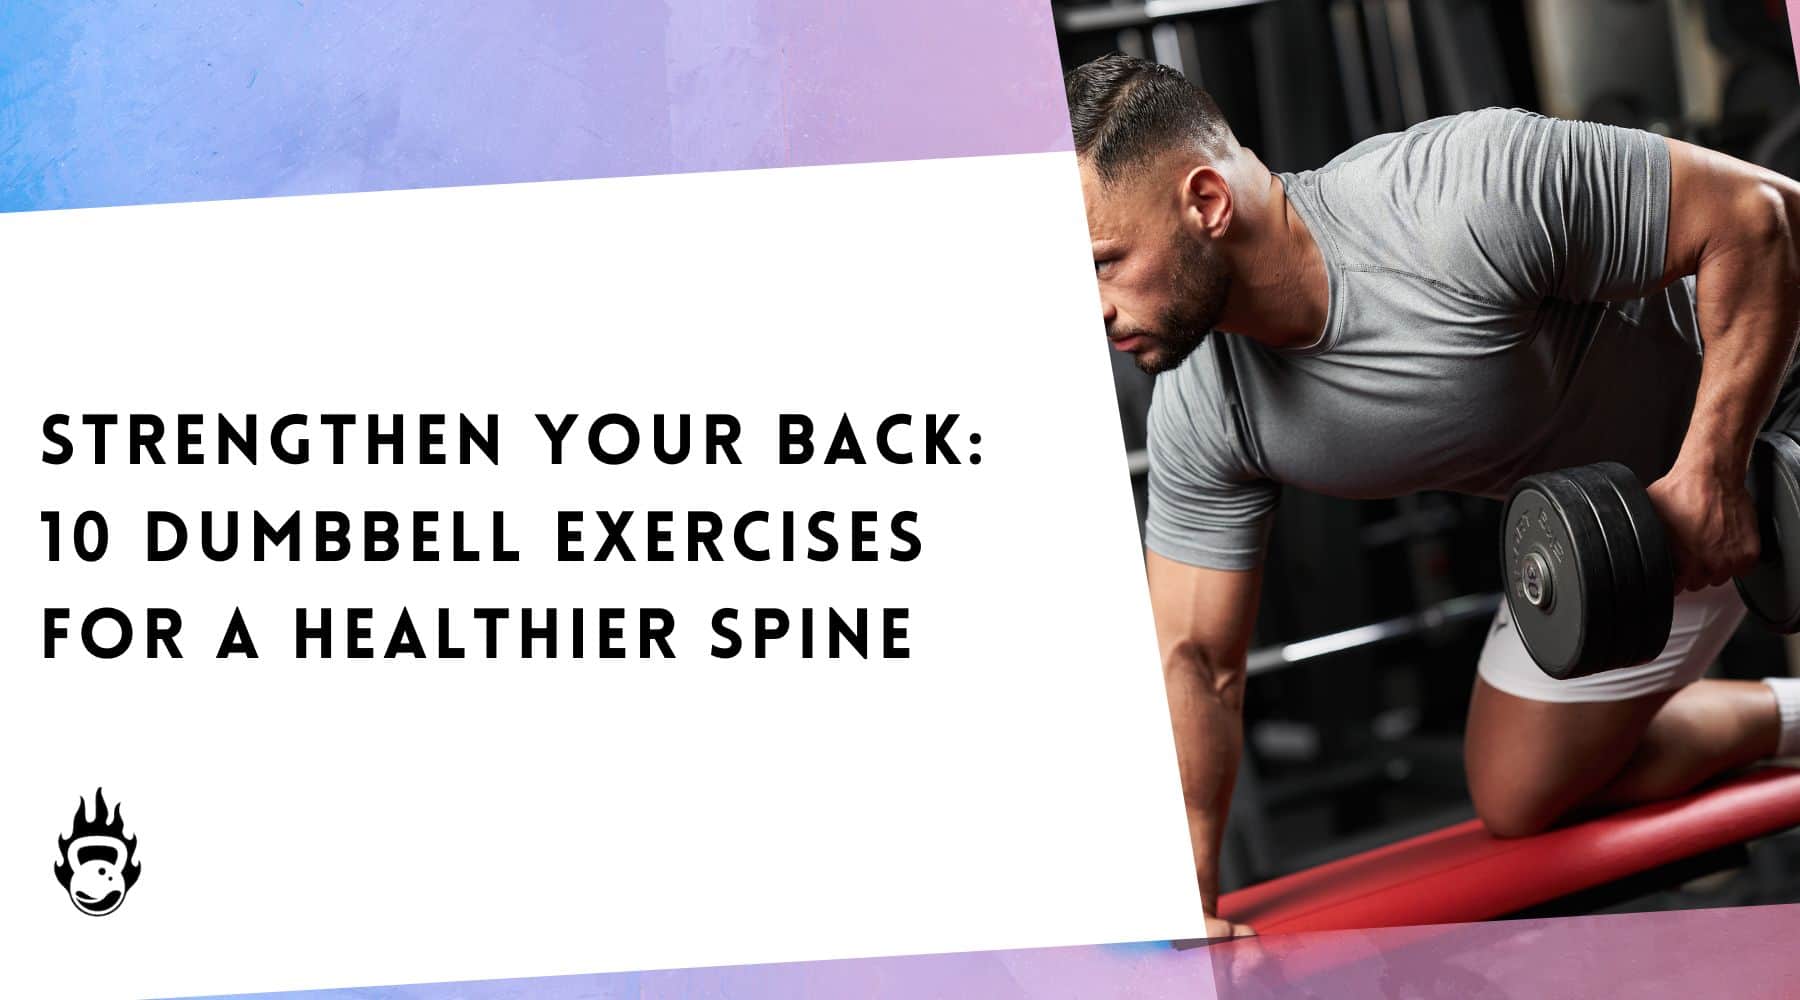 Strengthen Your Back: 10 Dumbbell Exercises for a Healthier Spine